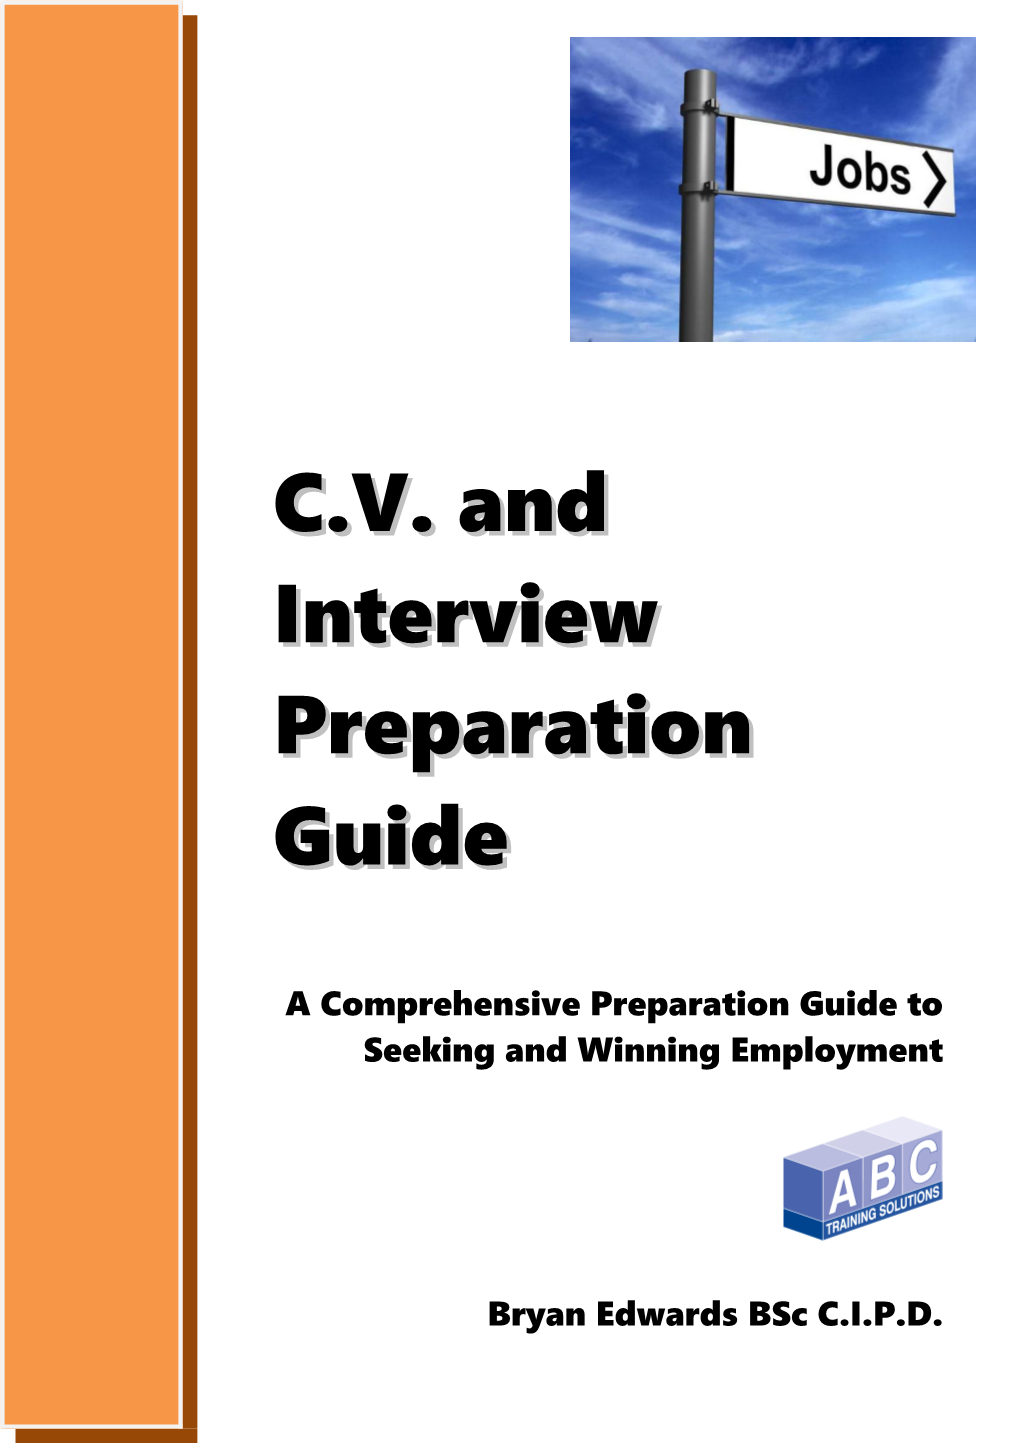 C.V. and Interview Preparation Guide